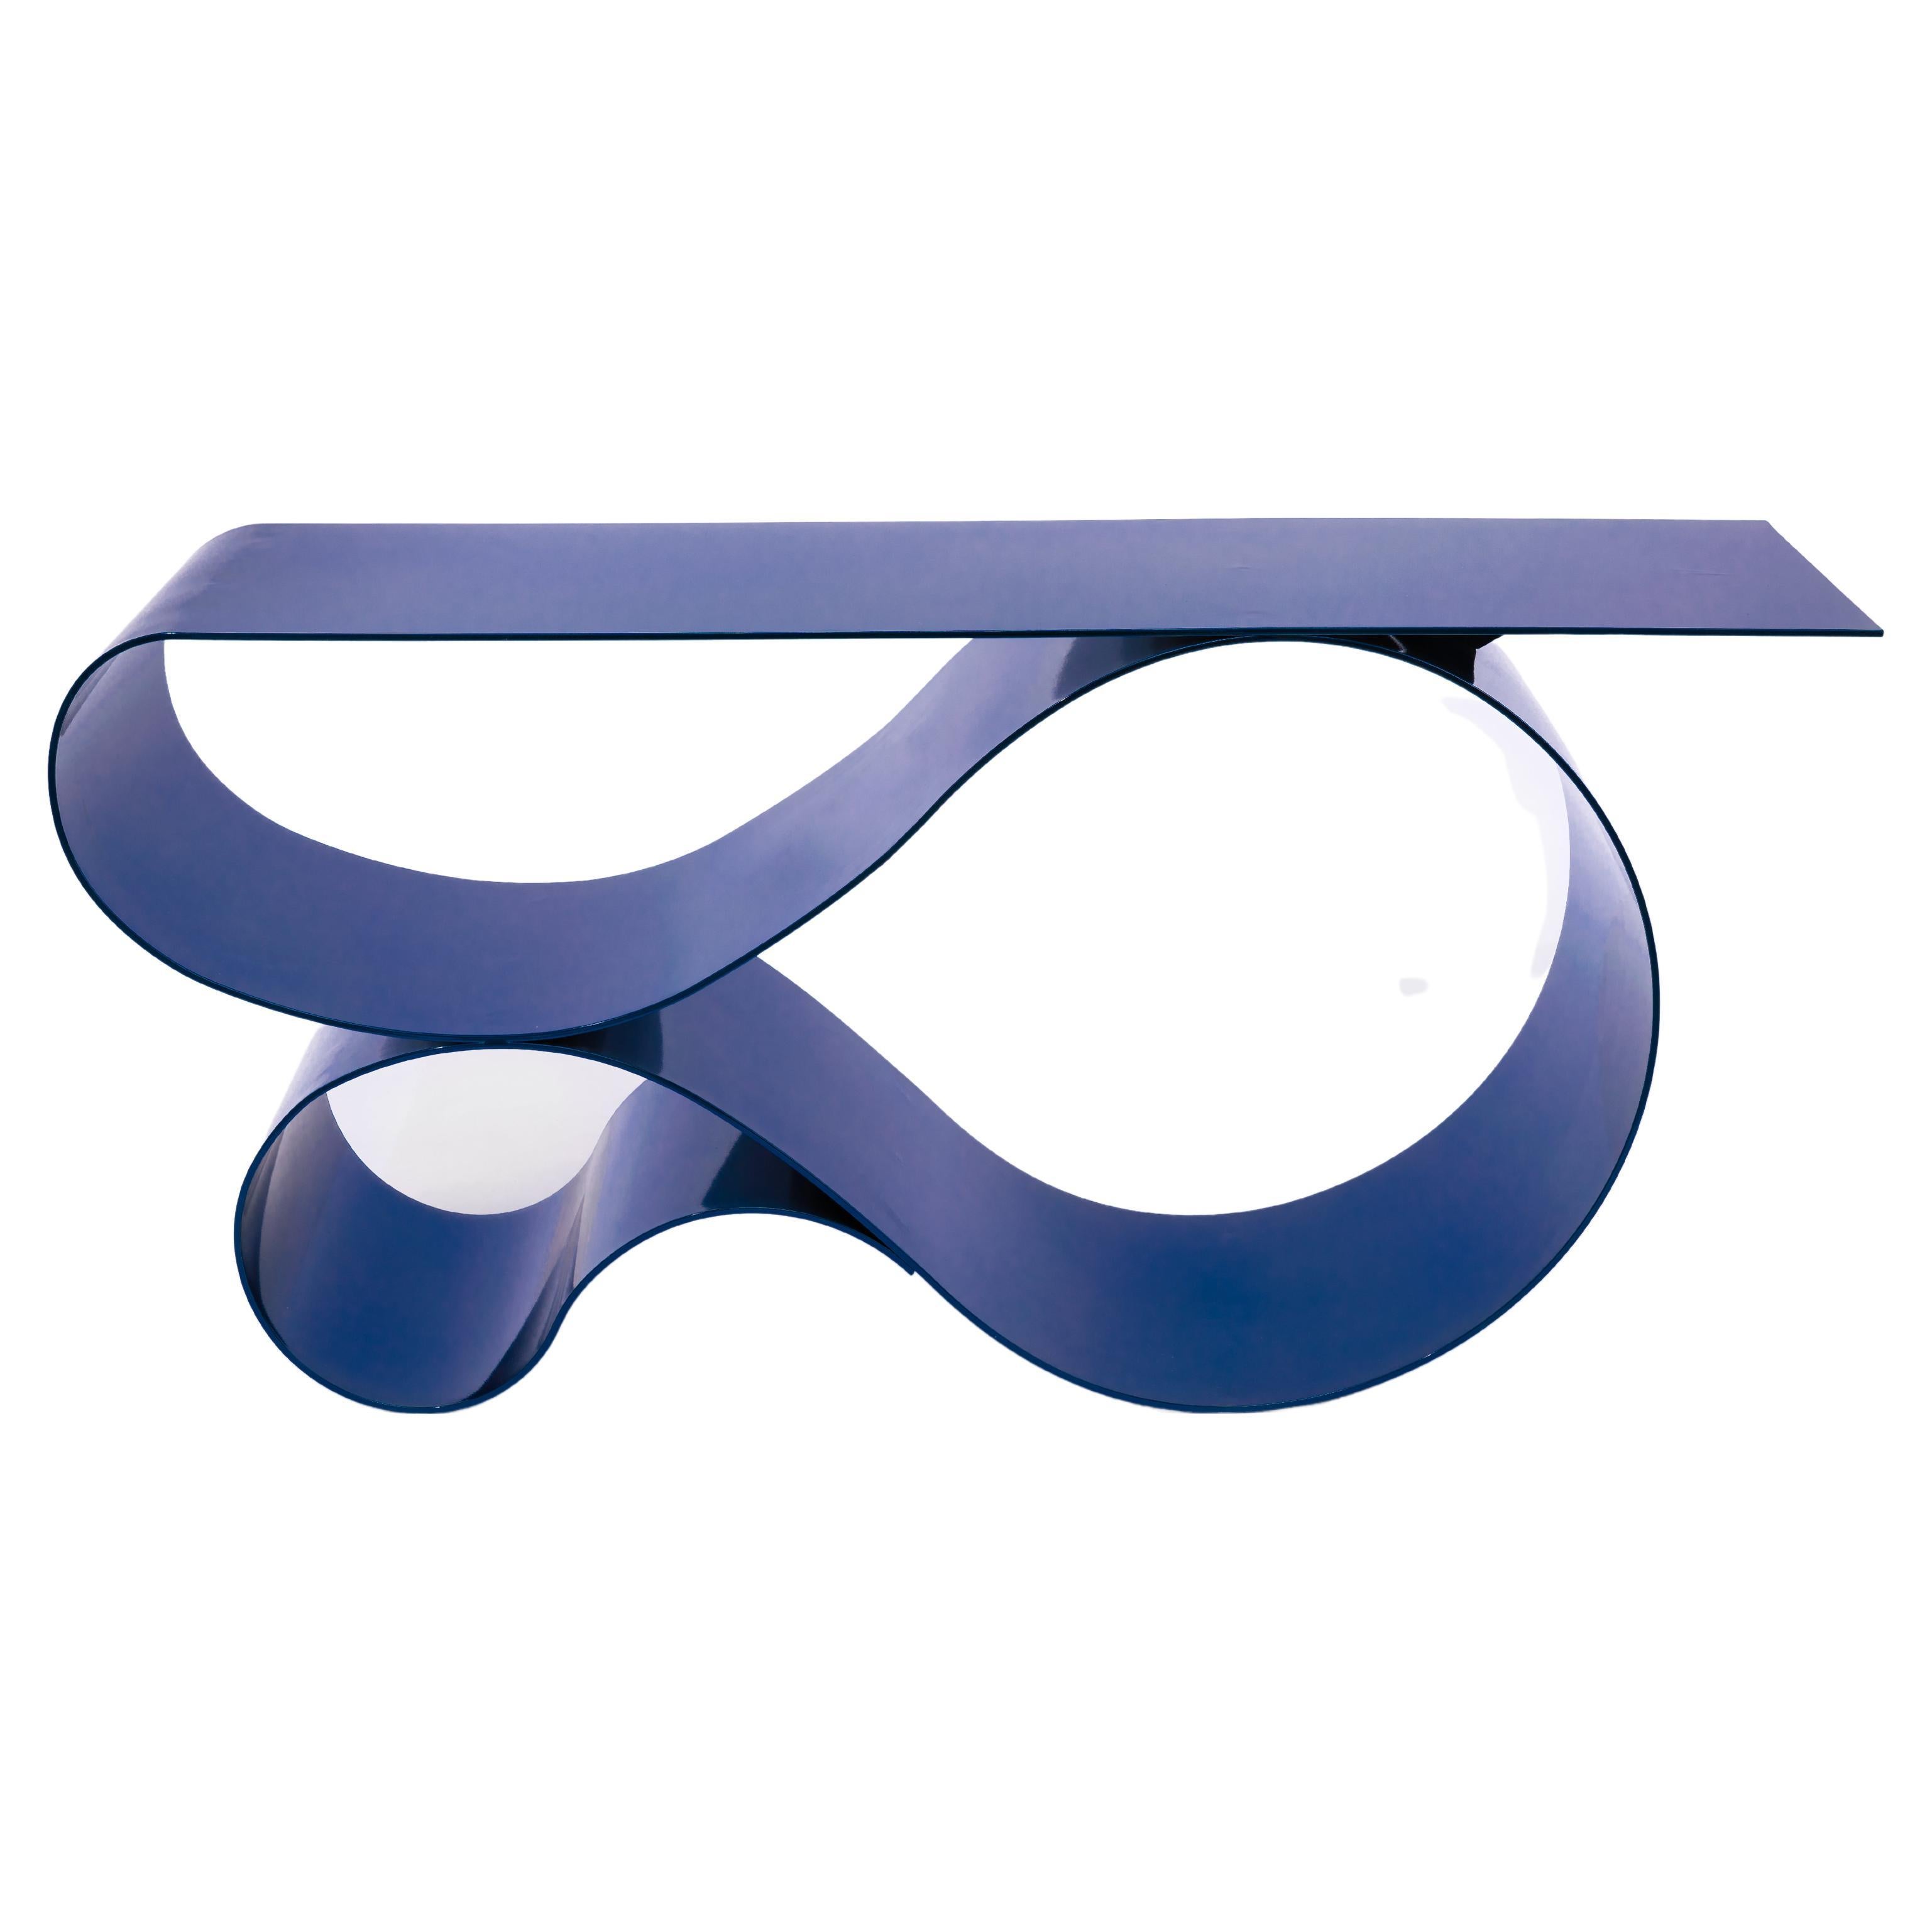 Whorl Console, in Blue Powder Coated Aluminum by Neal Aronowitz For Sale